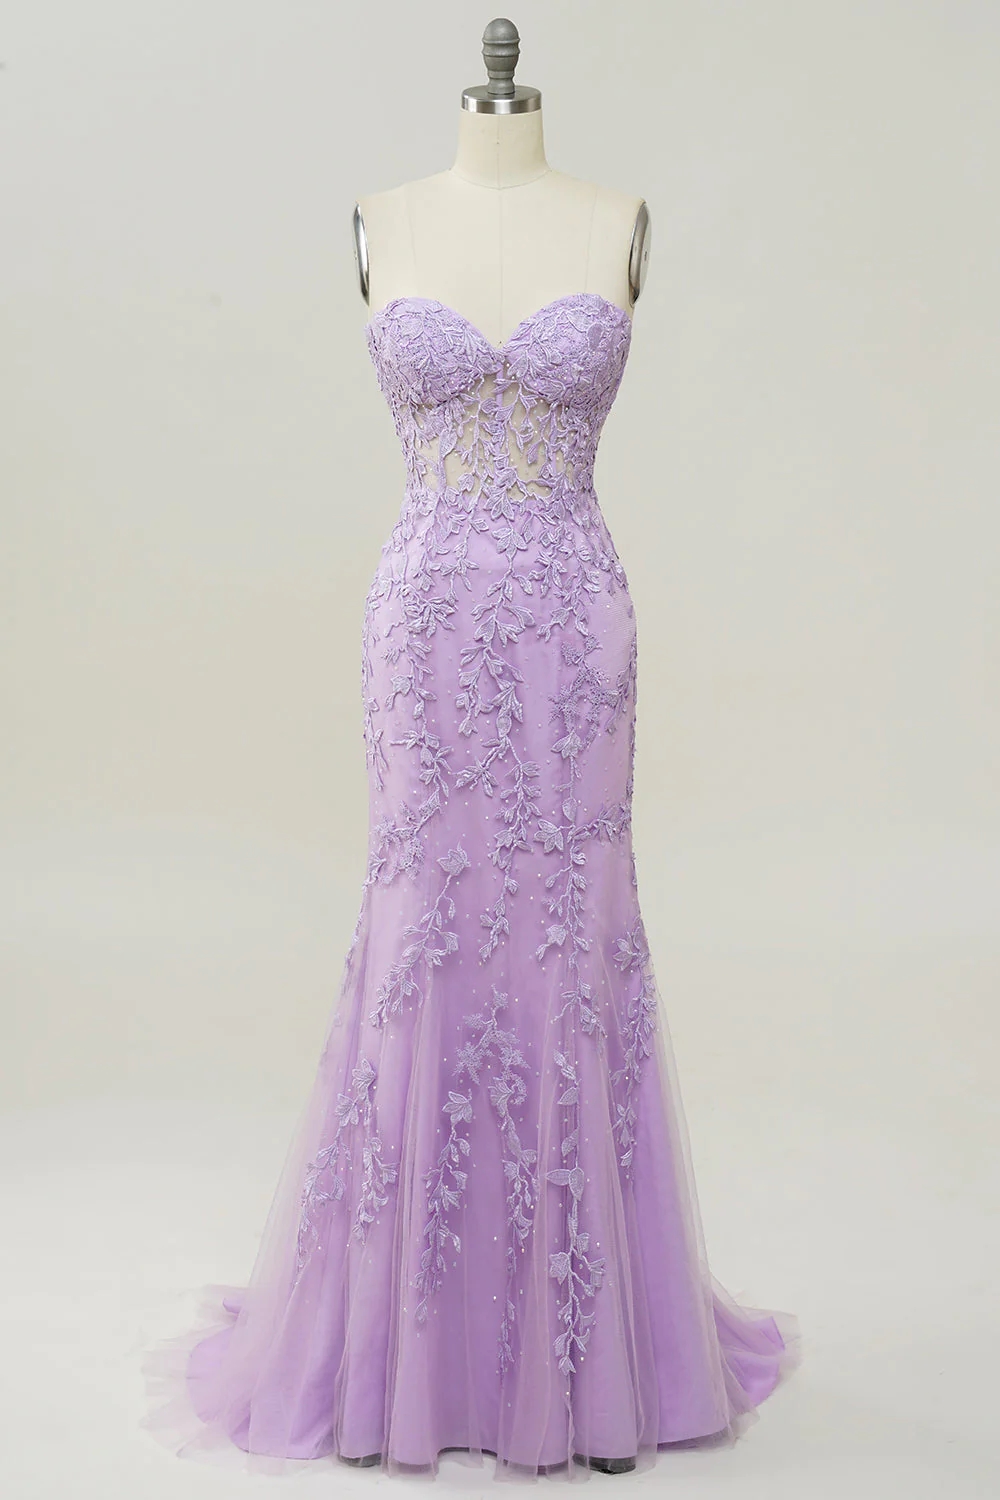 Lilac Sweetheart Fit To Flare Pageant Dress Evening Gown on Luulla